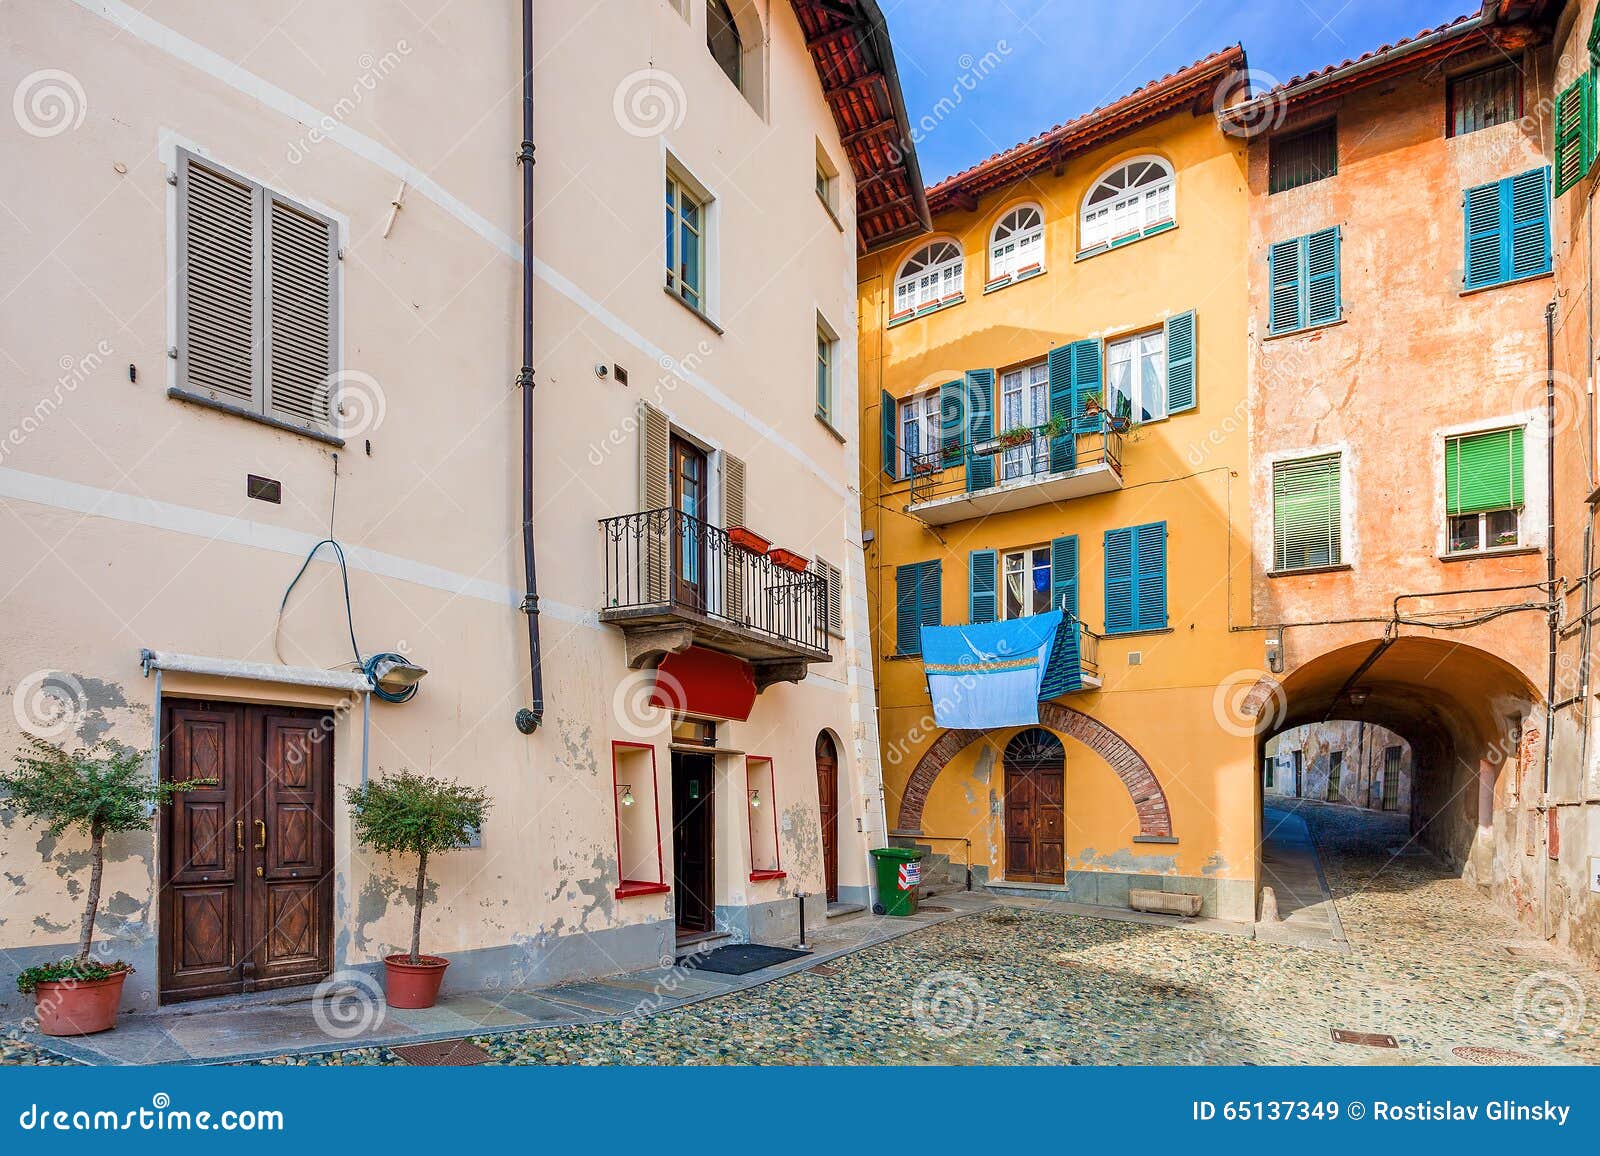 small backstreet and colorful houses in italy.